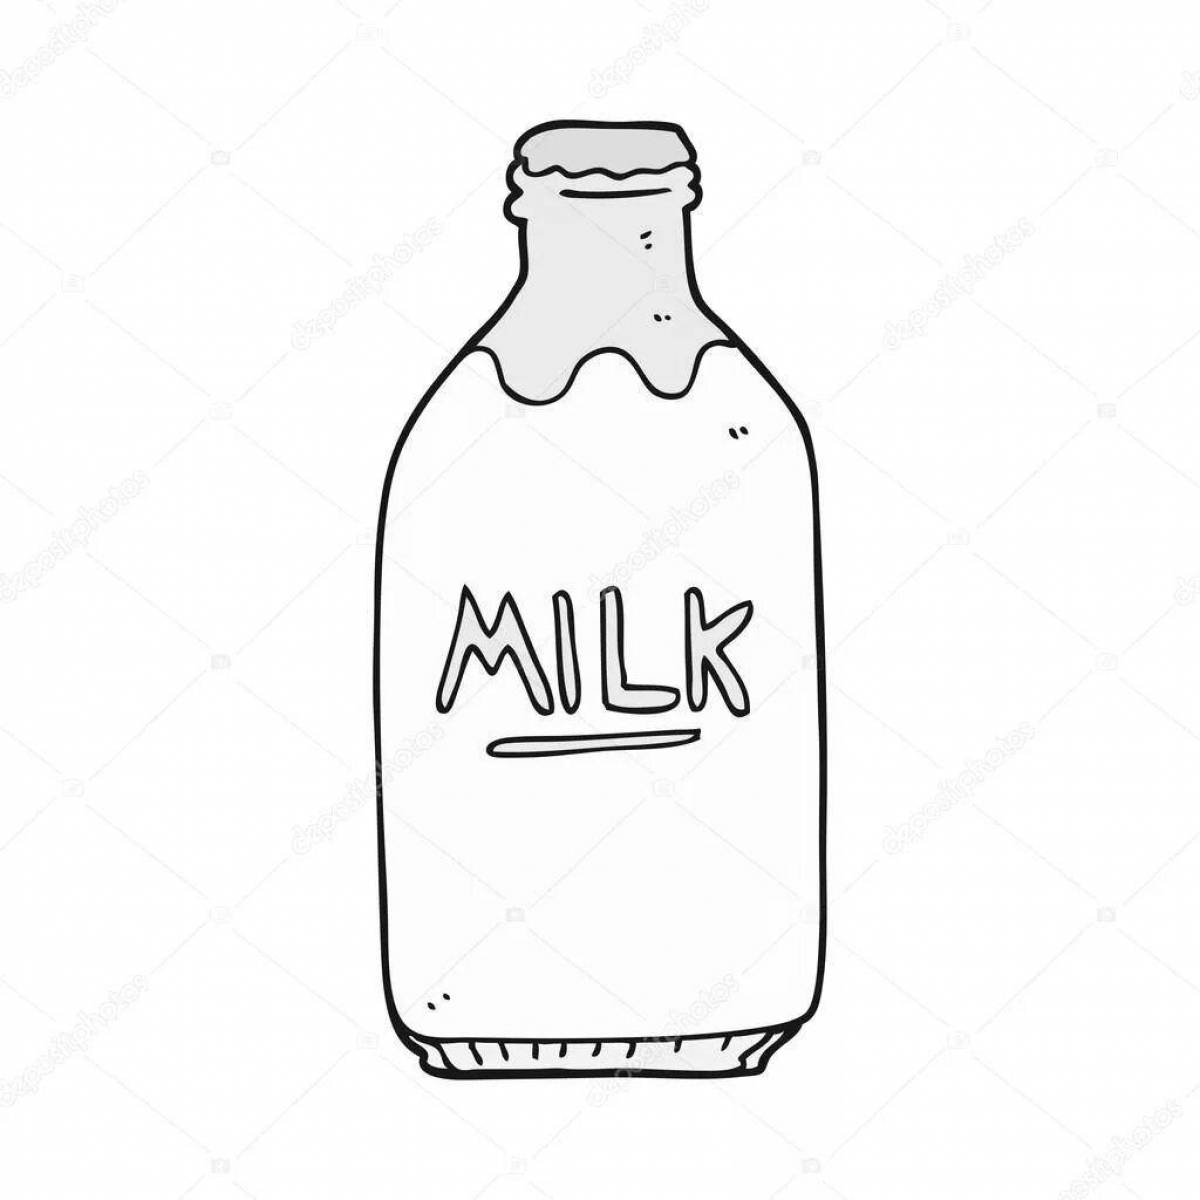 Coloring bright bottle of milk